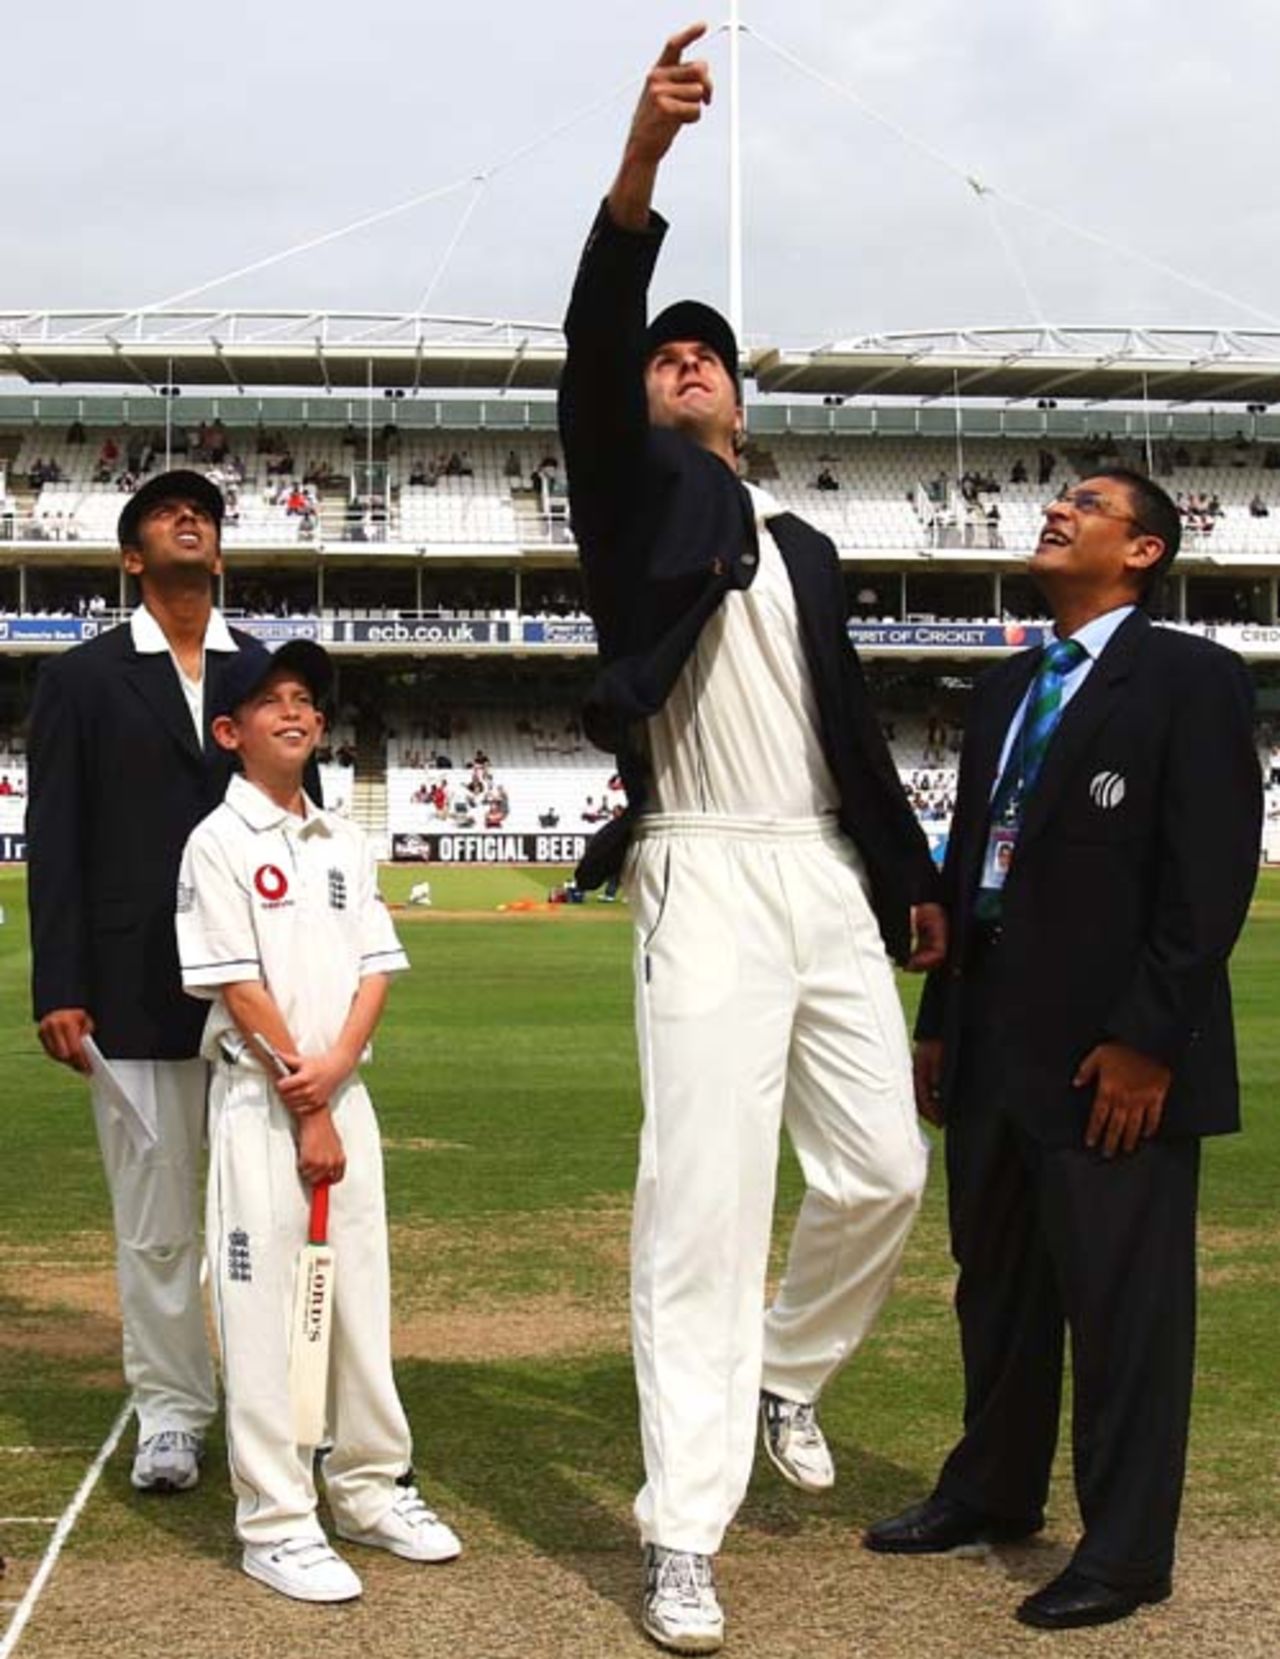 Michael Vaughan won the toss and opted to bat, England v India, 1st Test, Lord's, 1st day, July 19, 2007